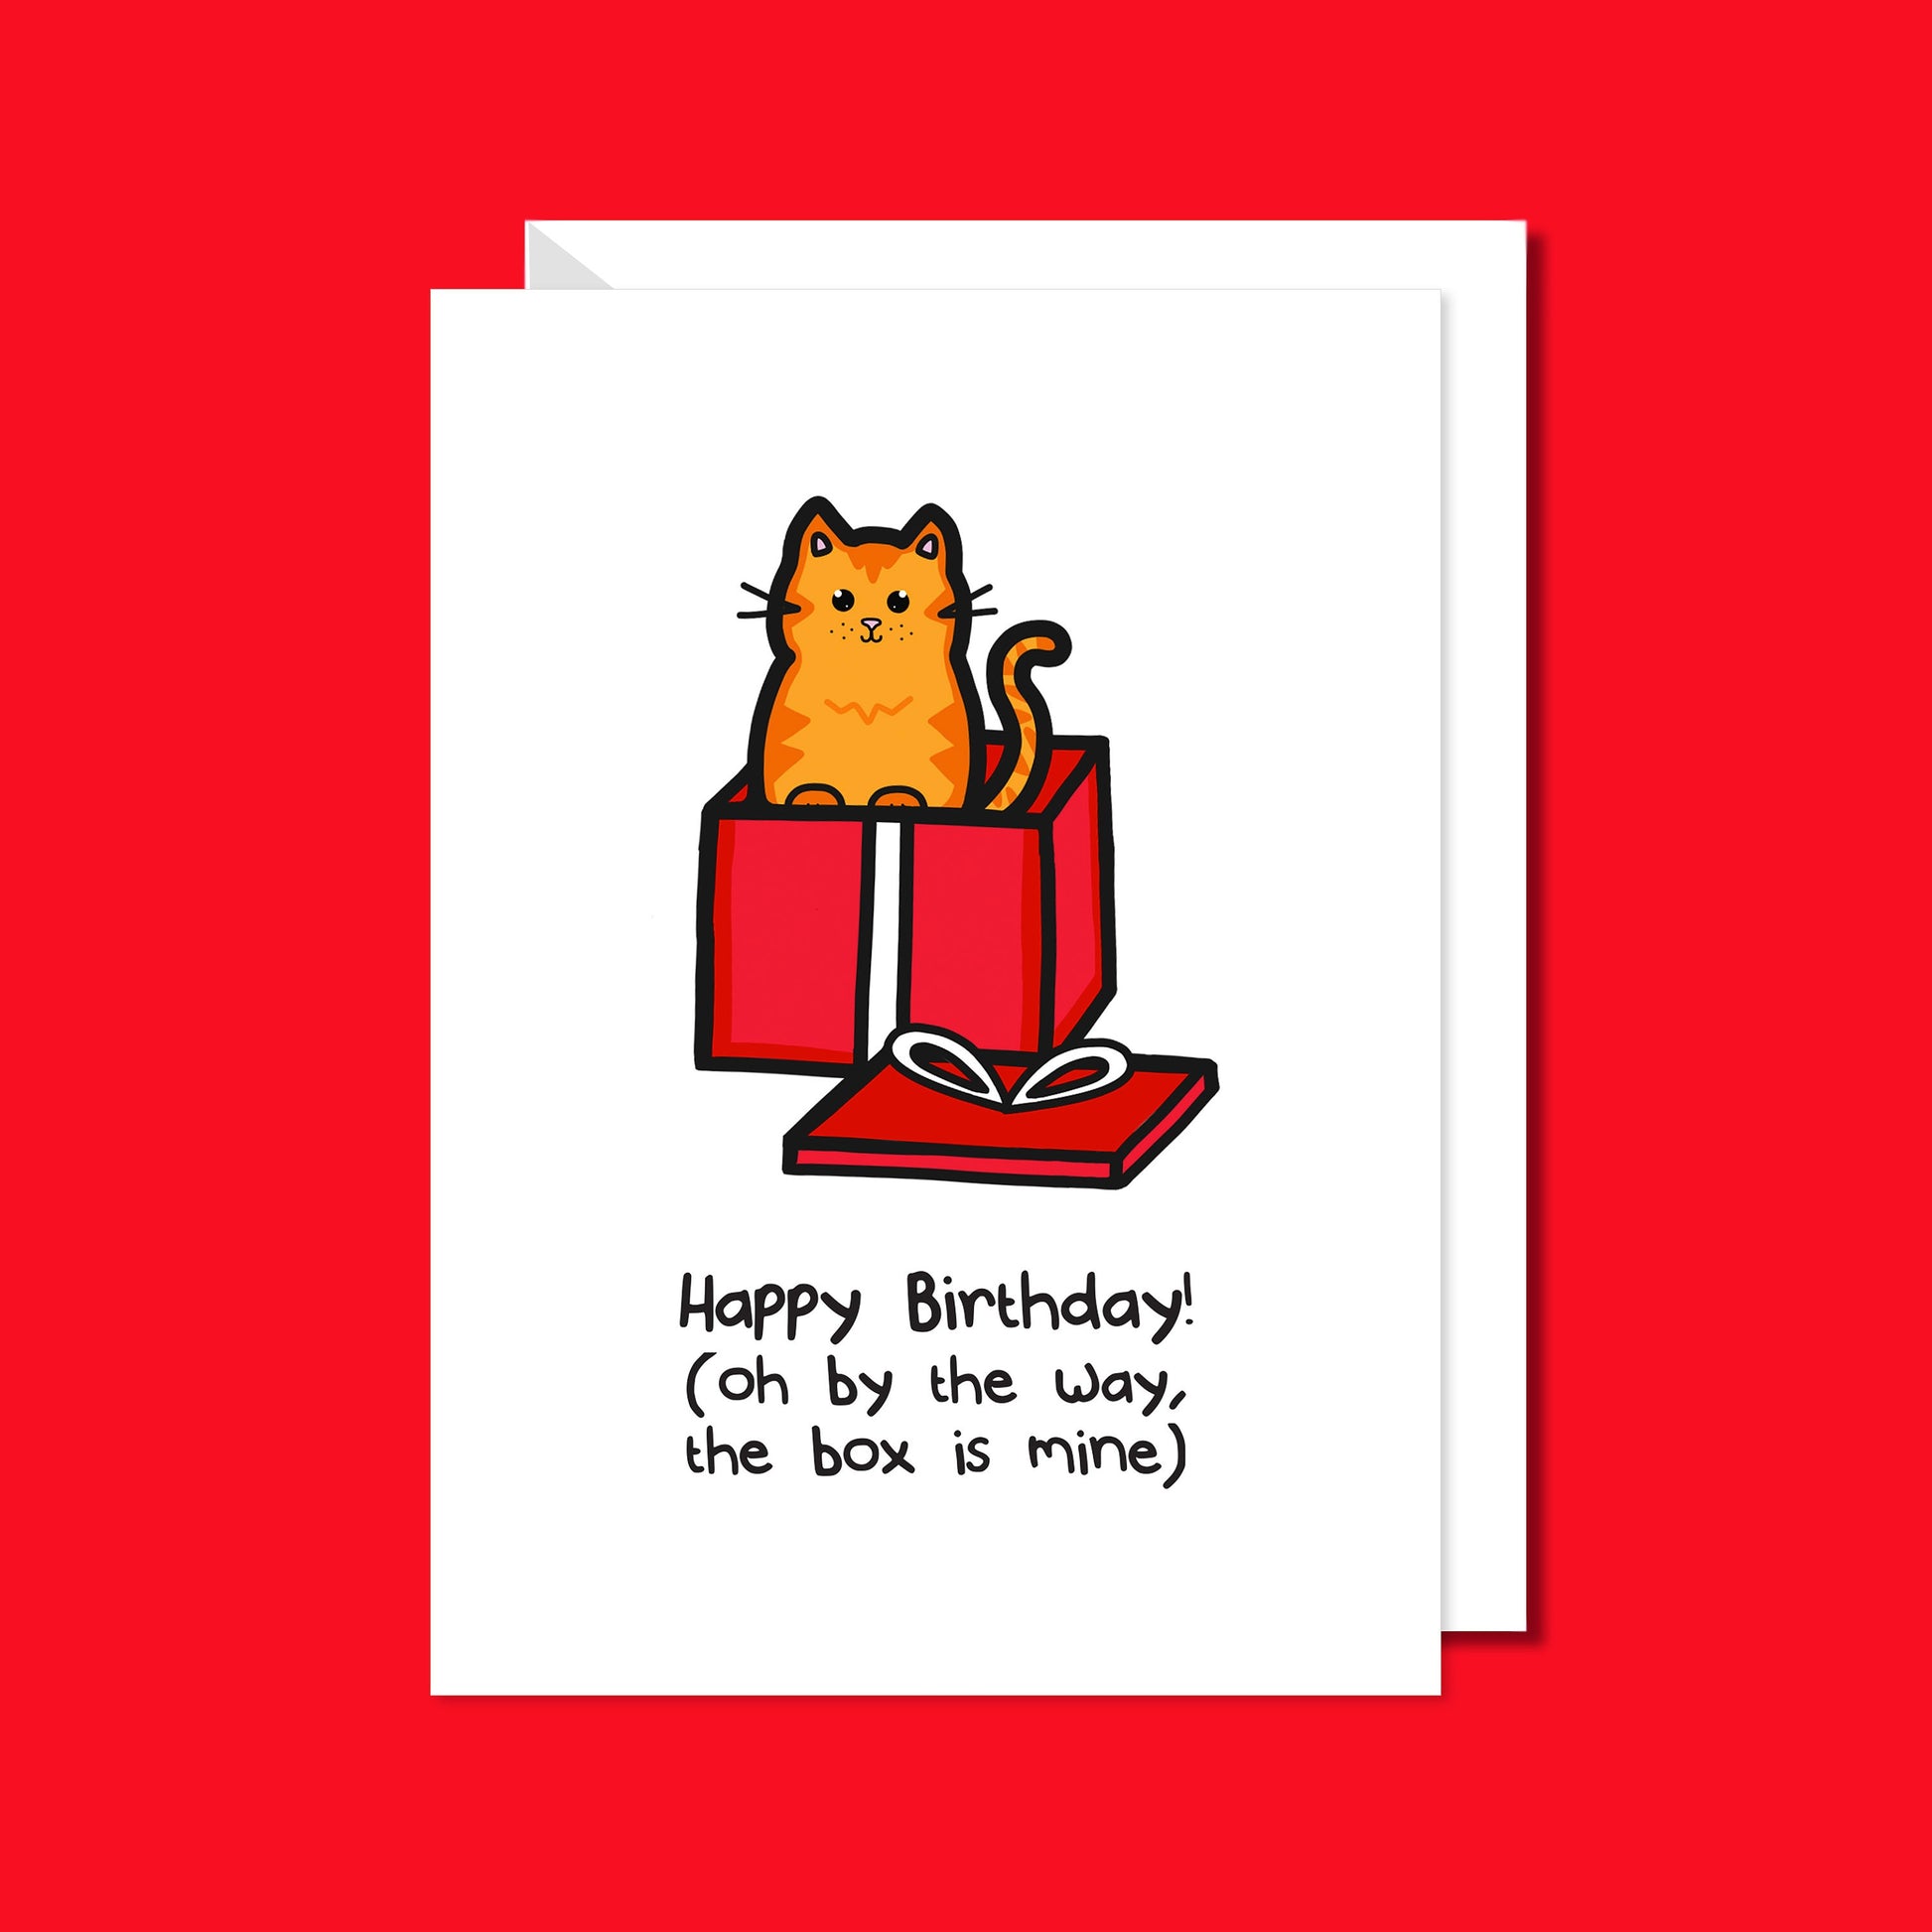 A white card with a ginger cat illustration coming out of a red present with text saying Happy Birthday! (Oh by the way, the box is mine). The a6 birthday card on a red background with a white envelope underneath.